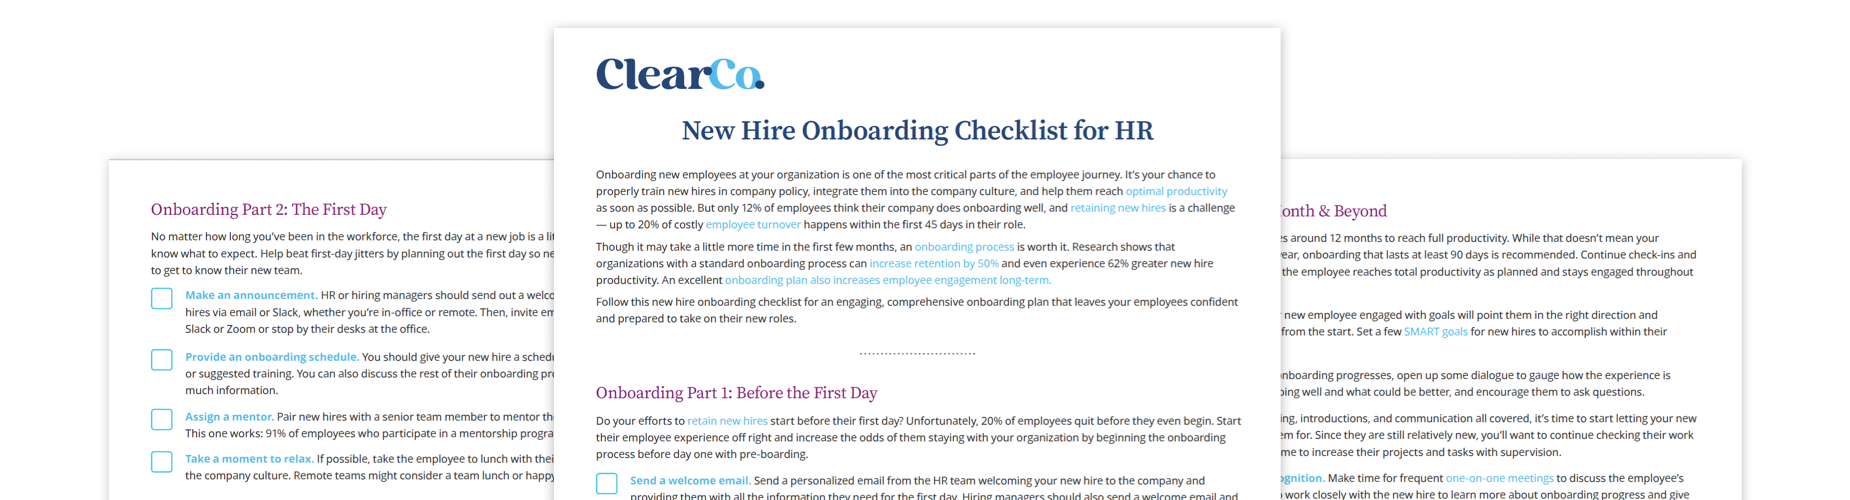 New-Hire-Onboarding-Checklist-for-HR-Checklist-LP-Mockup